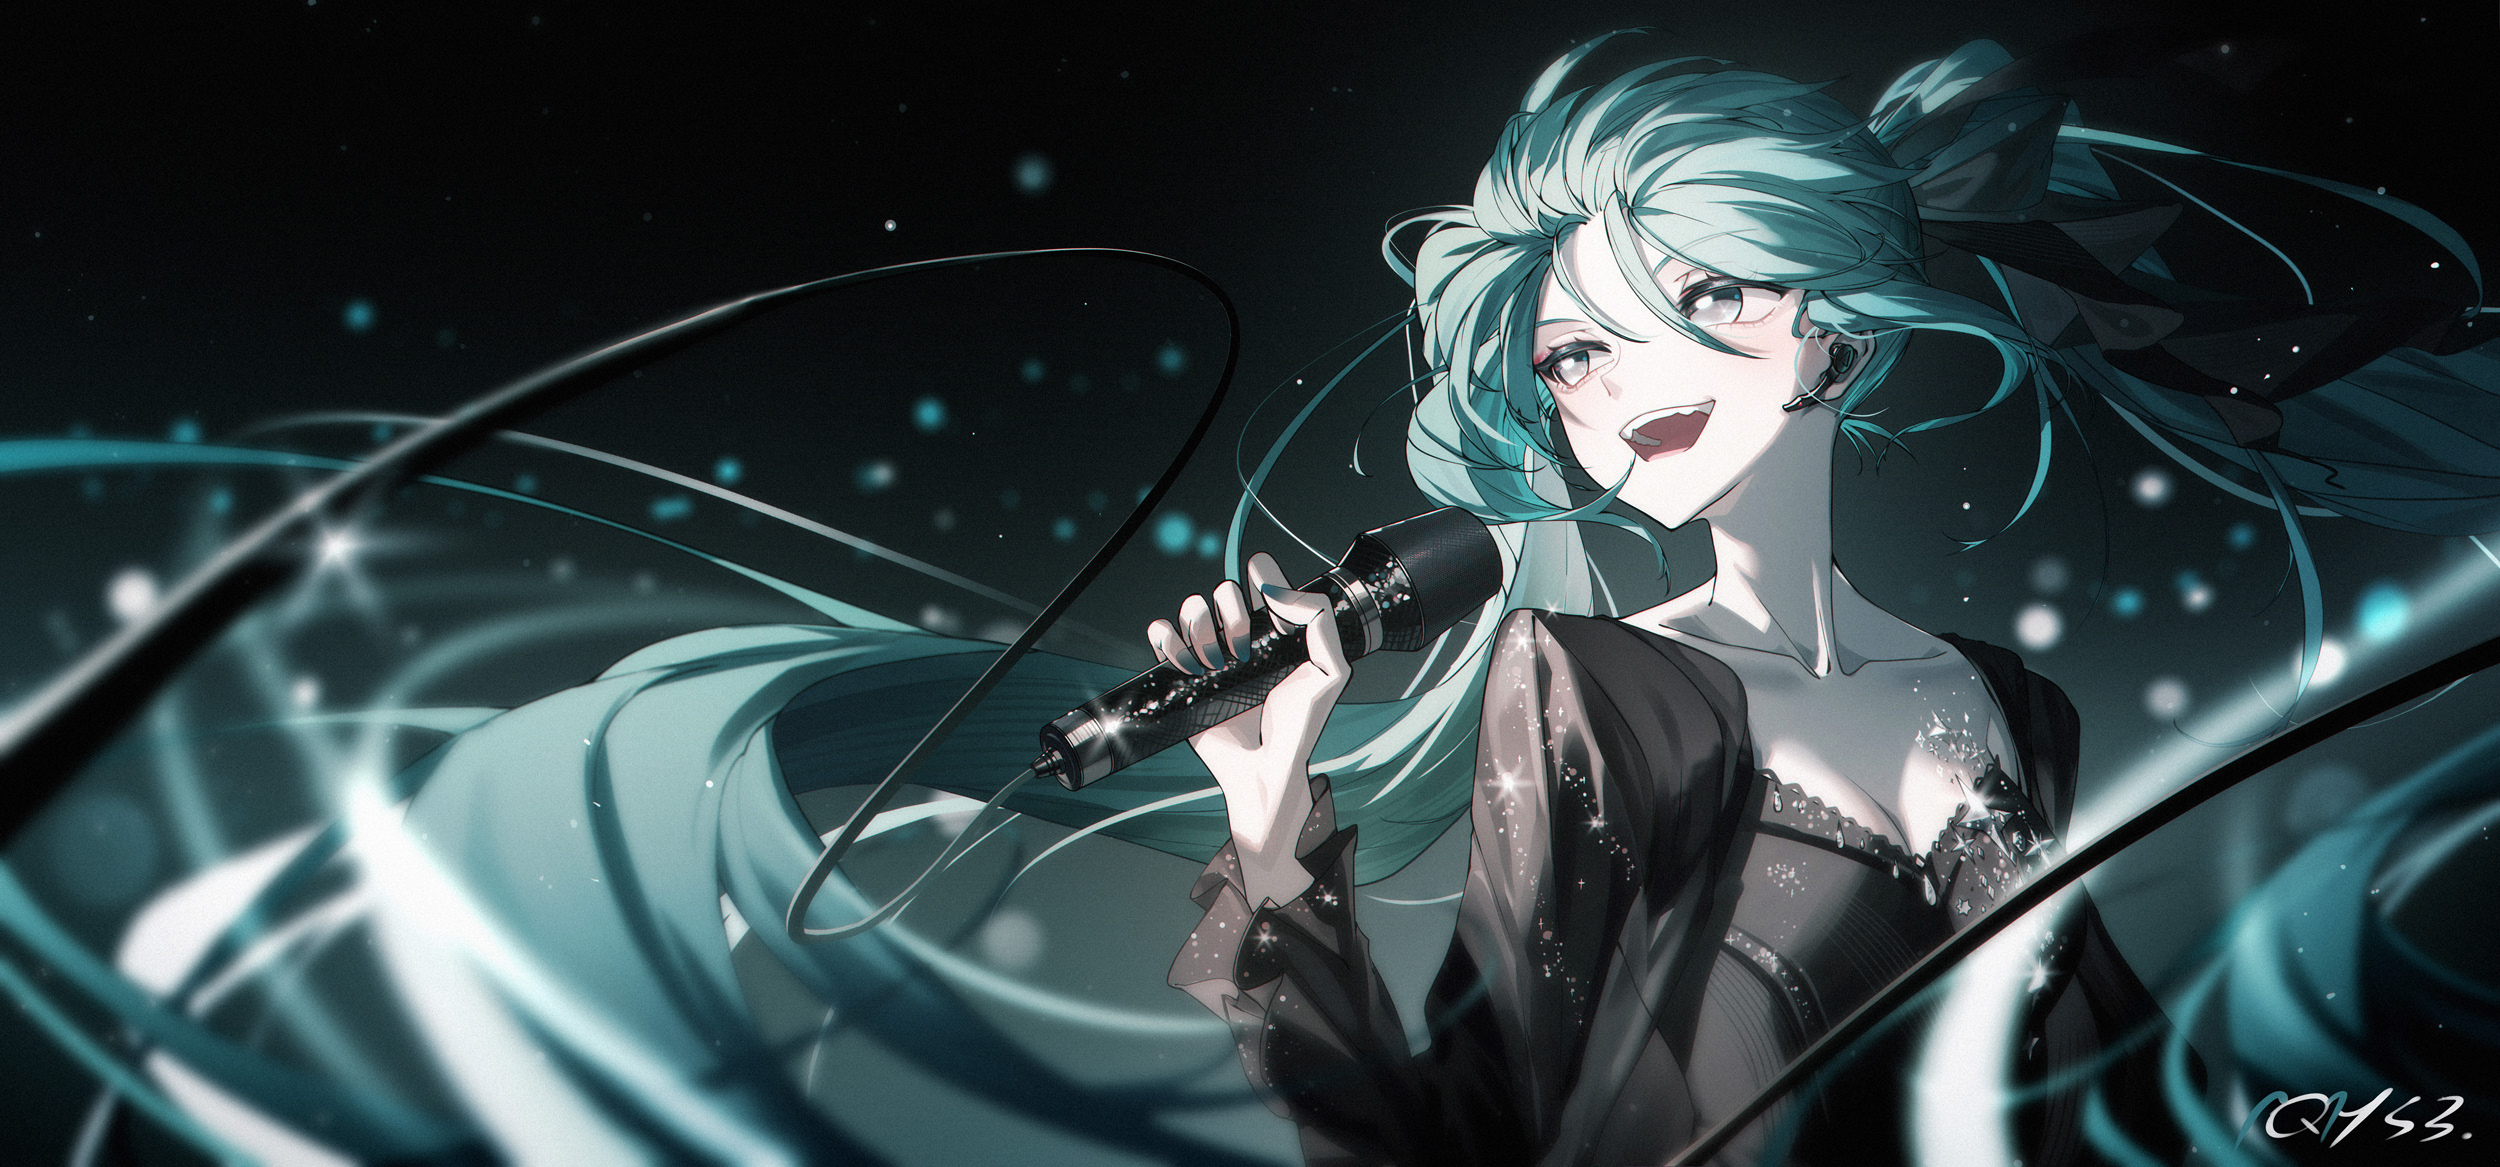 Anime 2500x1167 Hatsune Miku microphone Bai Yemeng Vocaloid anime girls long hair blue hair open mouth signature singing dress looking away twintails cleavage simple background minimalism